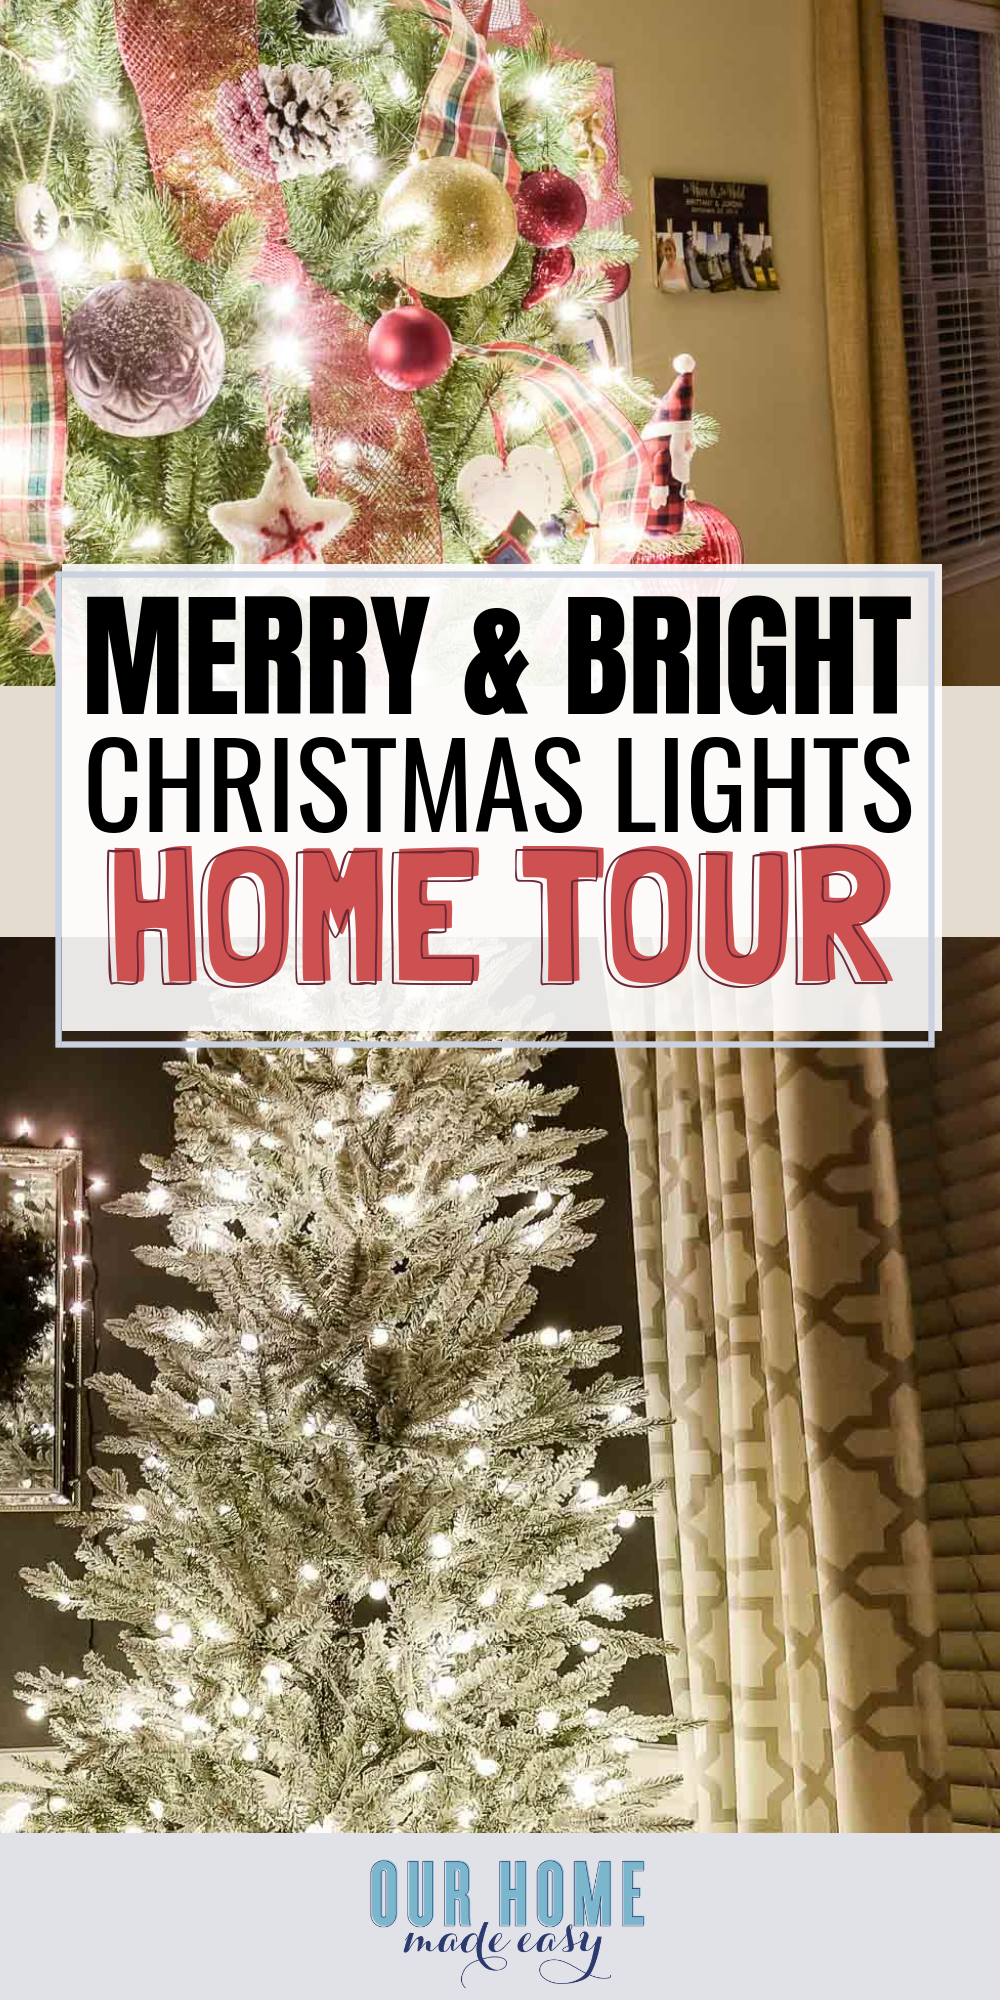 Join us for pretty night time holiday lights at Christmas time! Tour our home and fourteen other home bloggers who are opening up their homes! #christmas #christmastree #holidays #ourhomemadeeasy